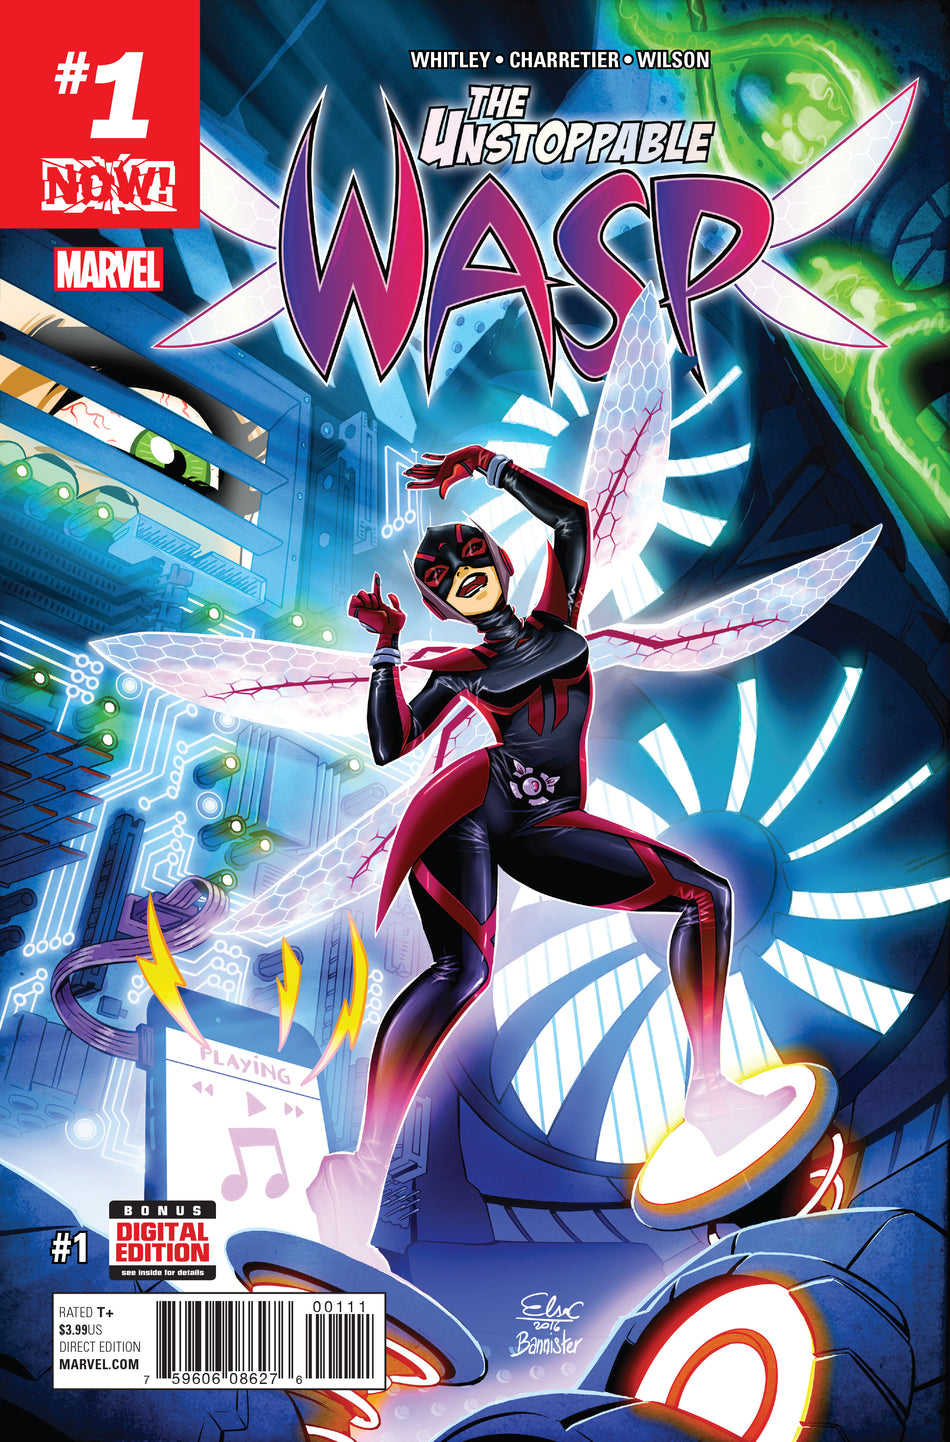 Photo of Unstoppable Wasp Issue 1 Now comic sold by Stronghold Collectibles